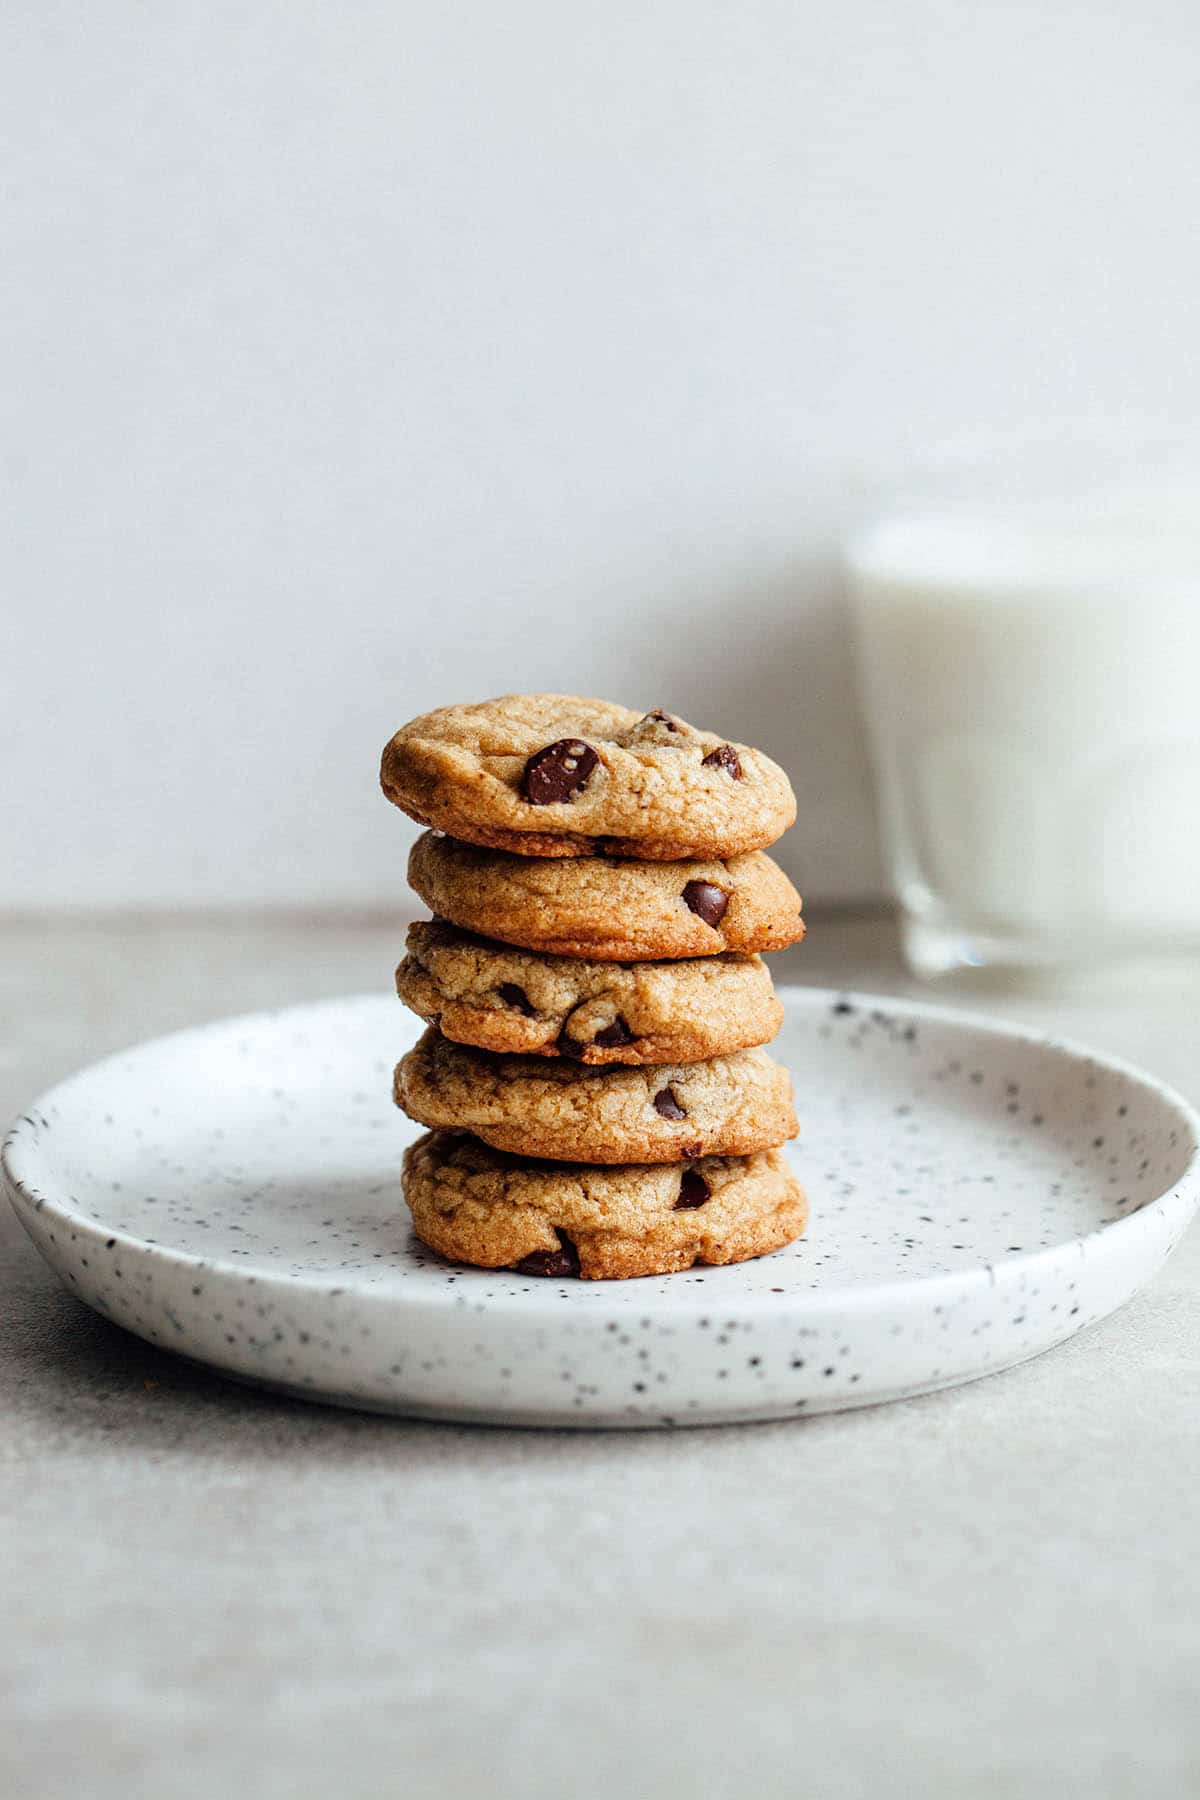 A stack of brown butter chocolate chip cookies on a plate.